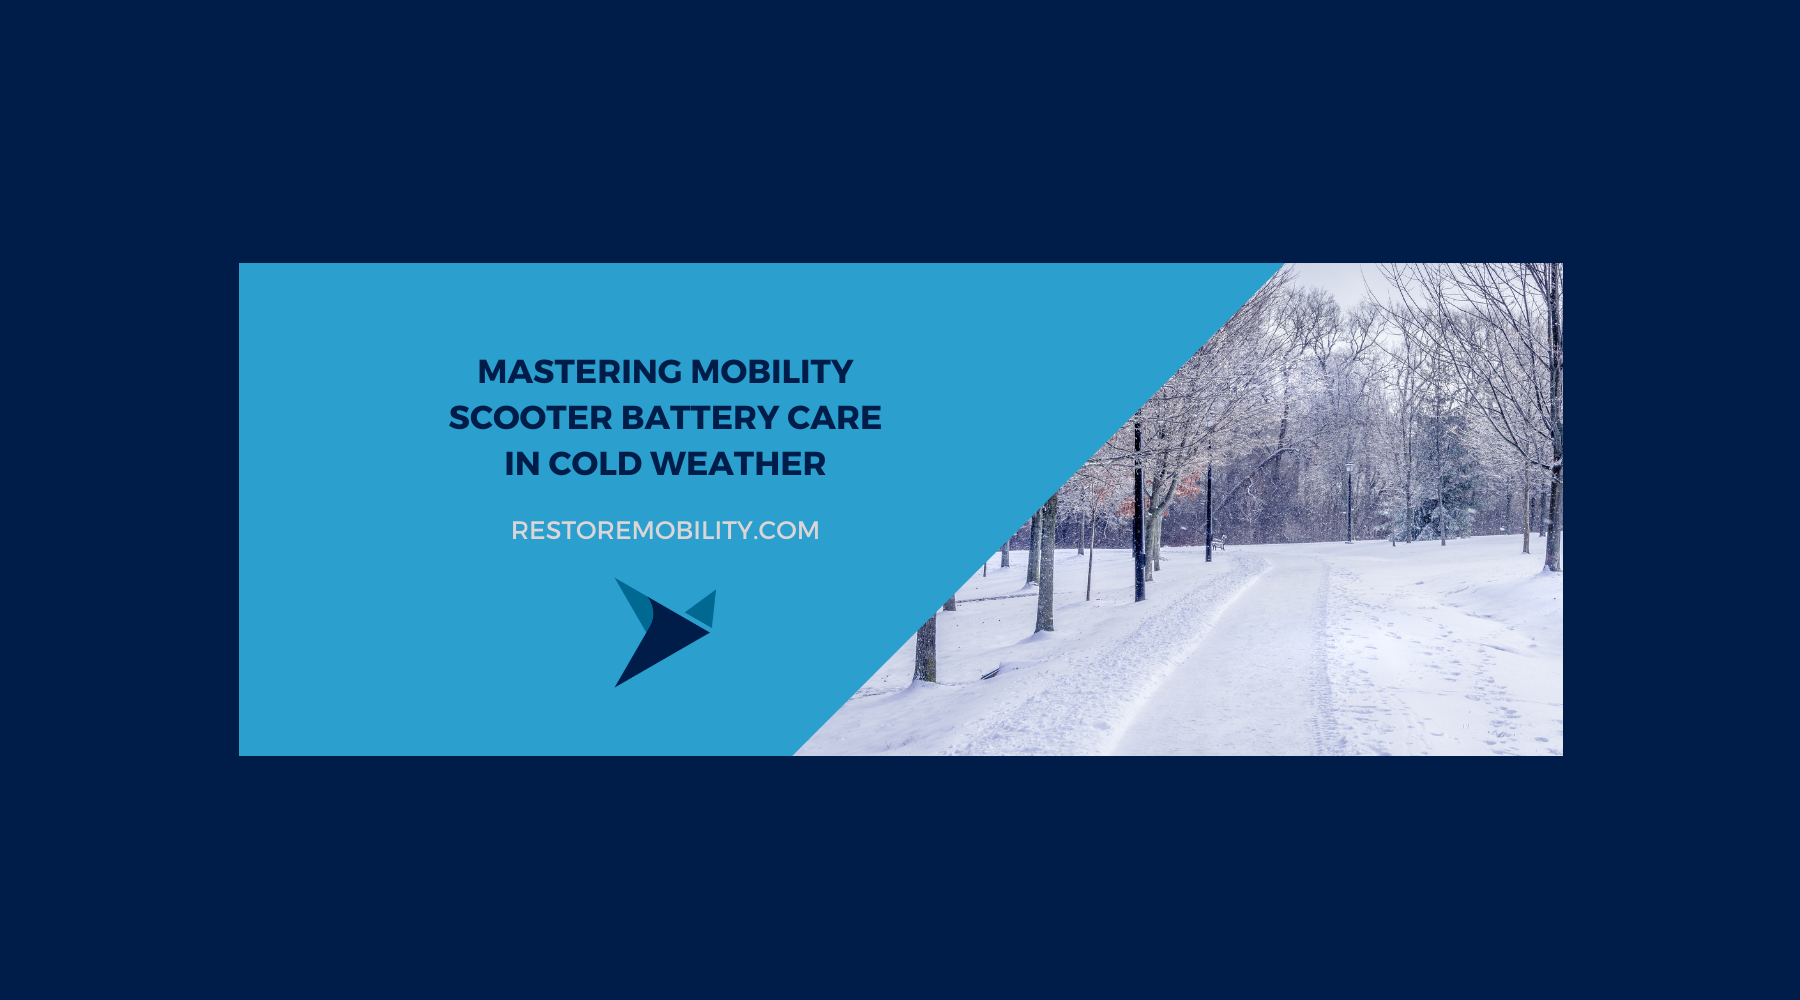 Mastering Mobility Scooter Battery Care in Cold Weather